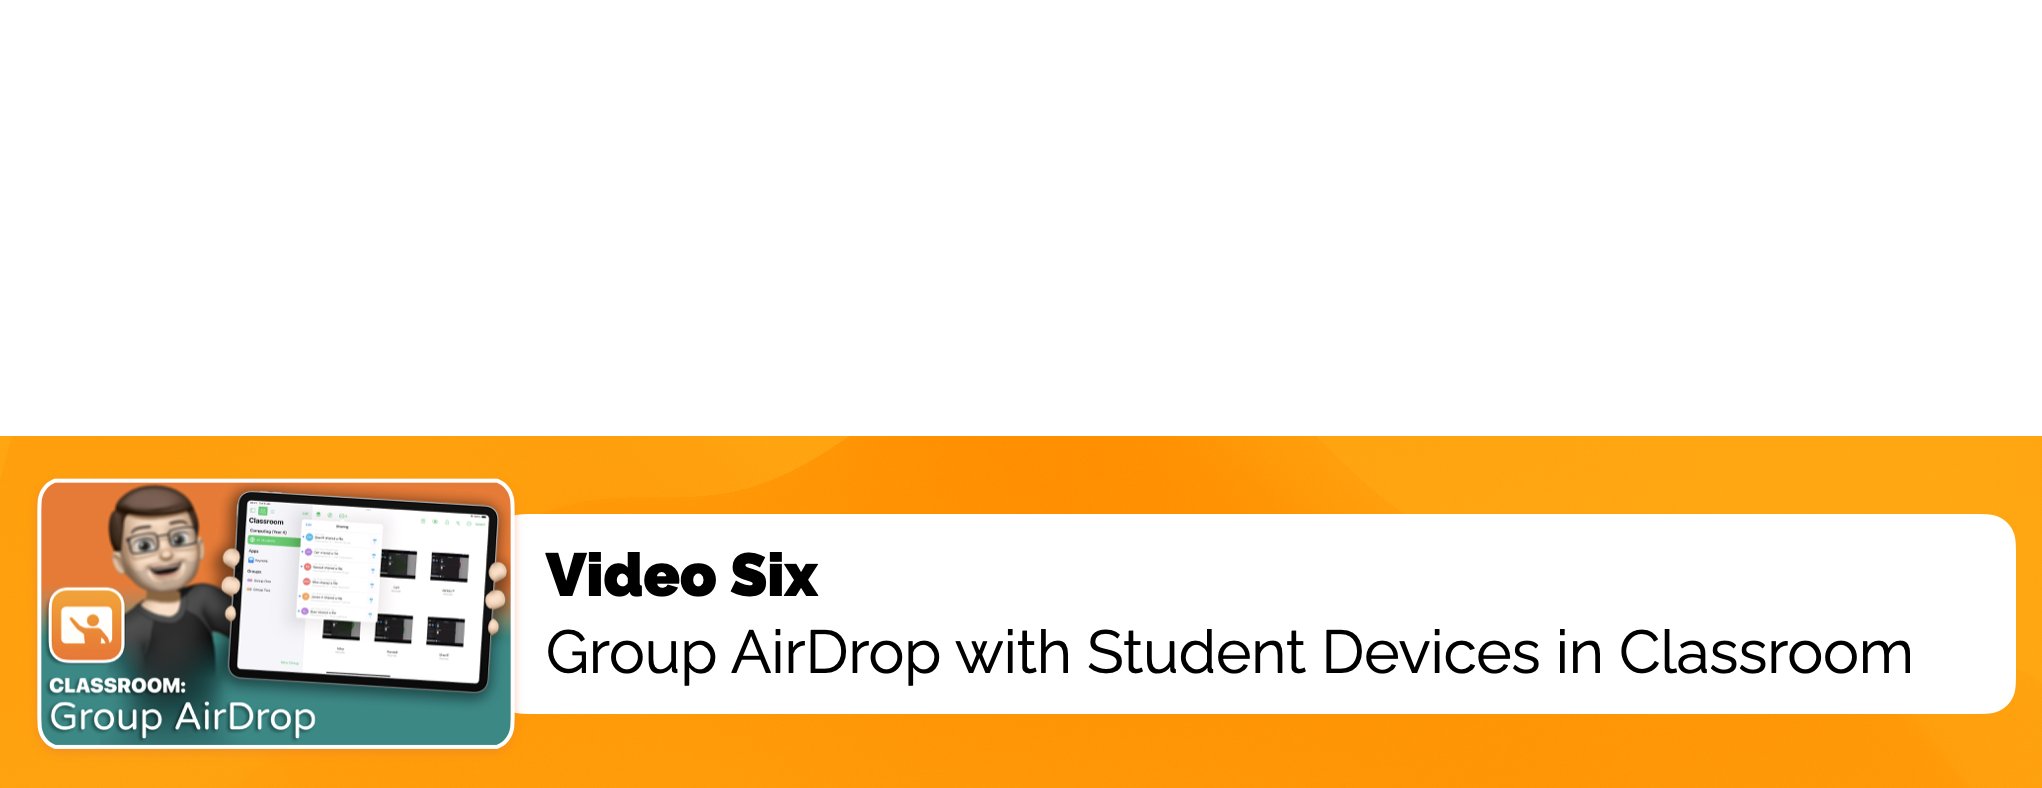 Video Six: Group AirDrop with Student Devices in Classroom